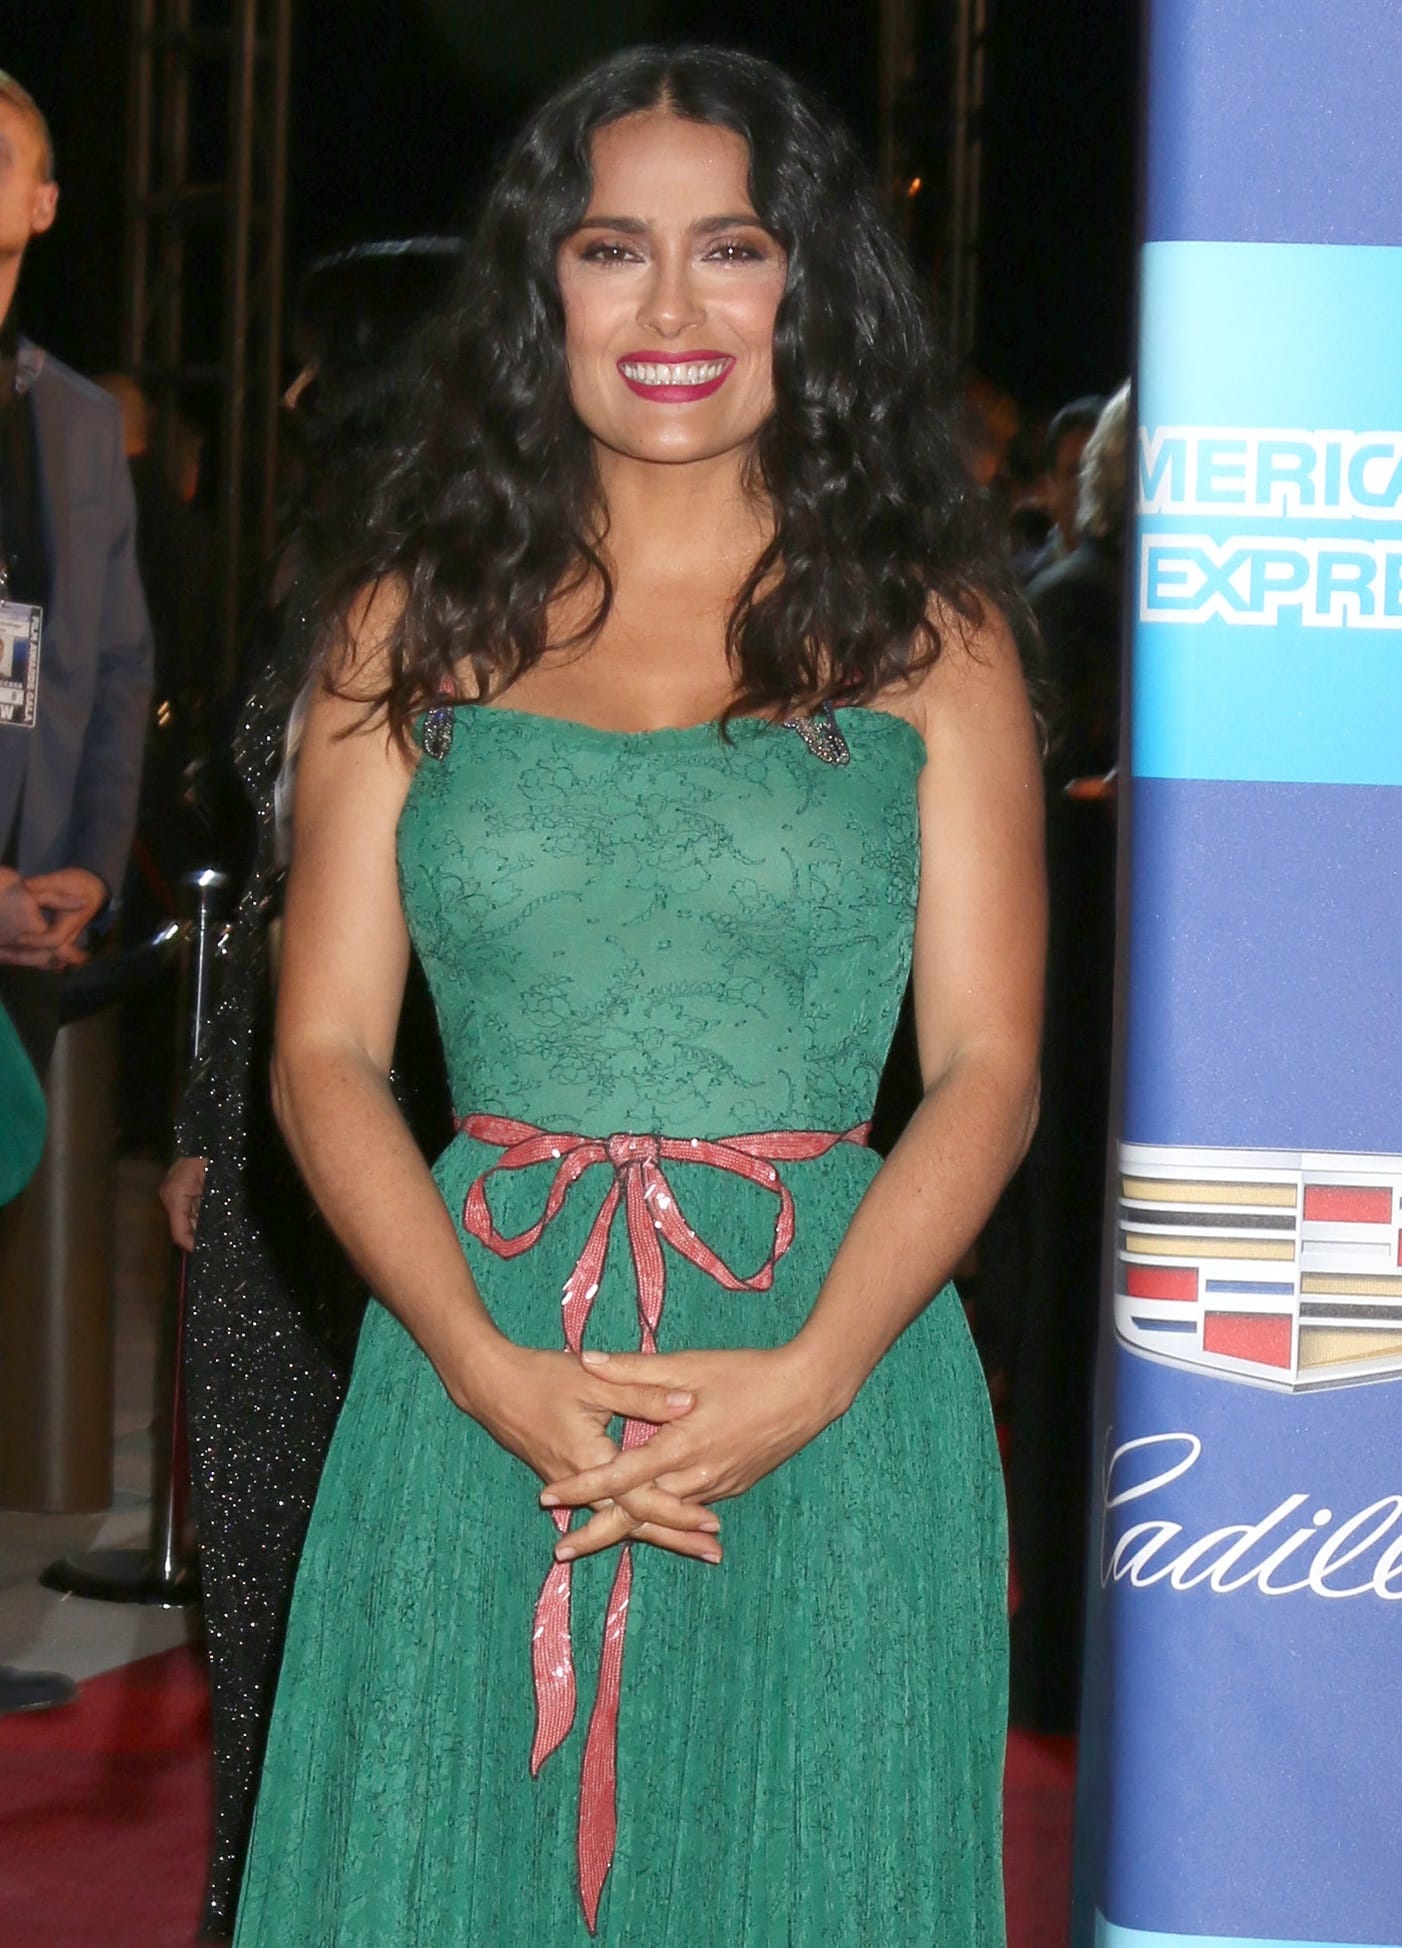 Salma Hayek wearing an alluring green Gucci lace gown at the 2018 Palm Springs International Film Festival Awards Gala on Tuesday in Palm Springs, California, on January 2, 2018